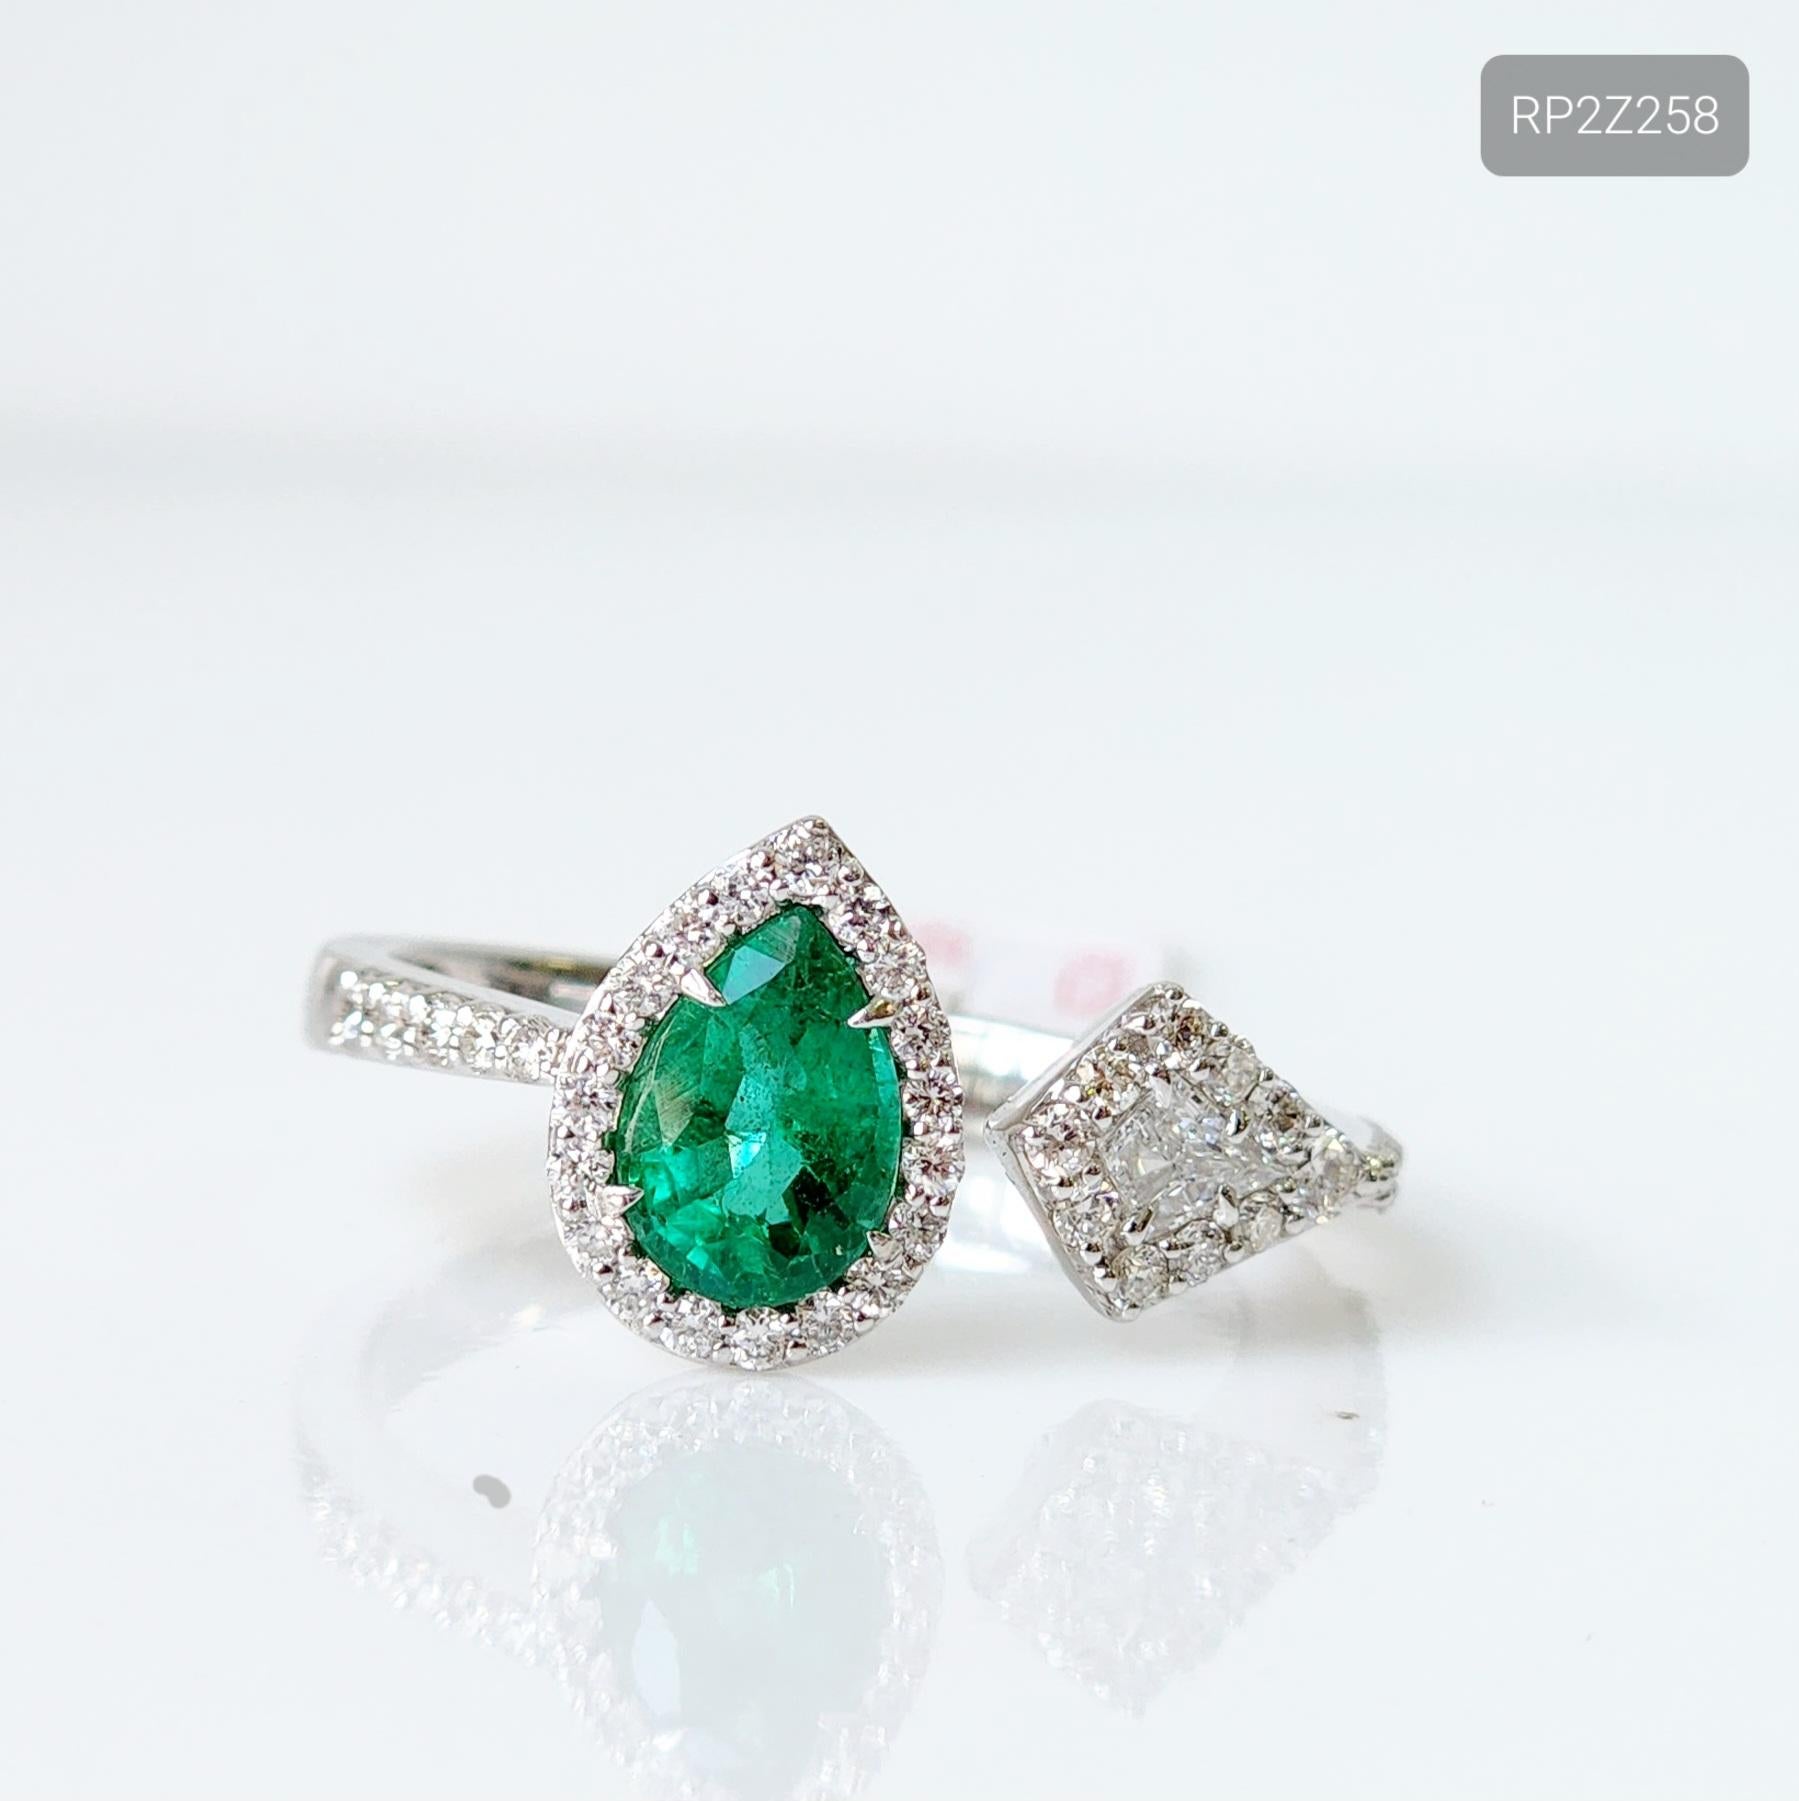 Introducing our exquisite Toi et Moi Emerald and Diamond Ring. This stunning piece showcases a 0.65 carat pear-shaped green emerald as the centerpiece, elegantly surrounded by a halo of glistening 0.31 carat white melee diamonds. The addition of